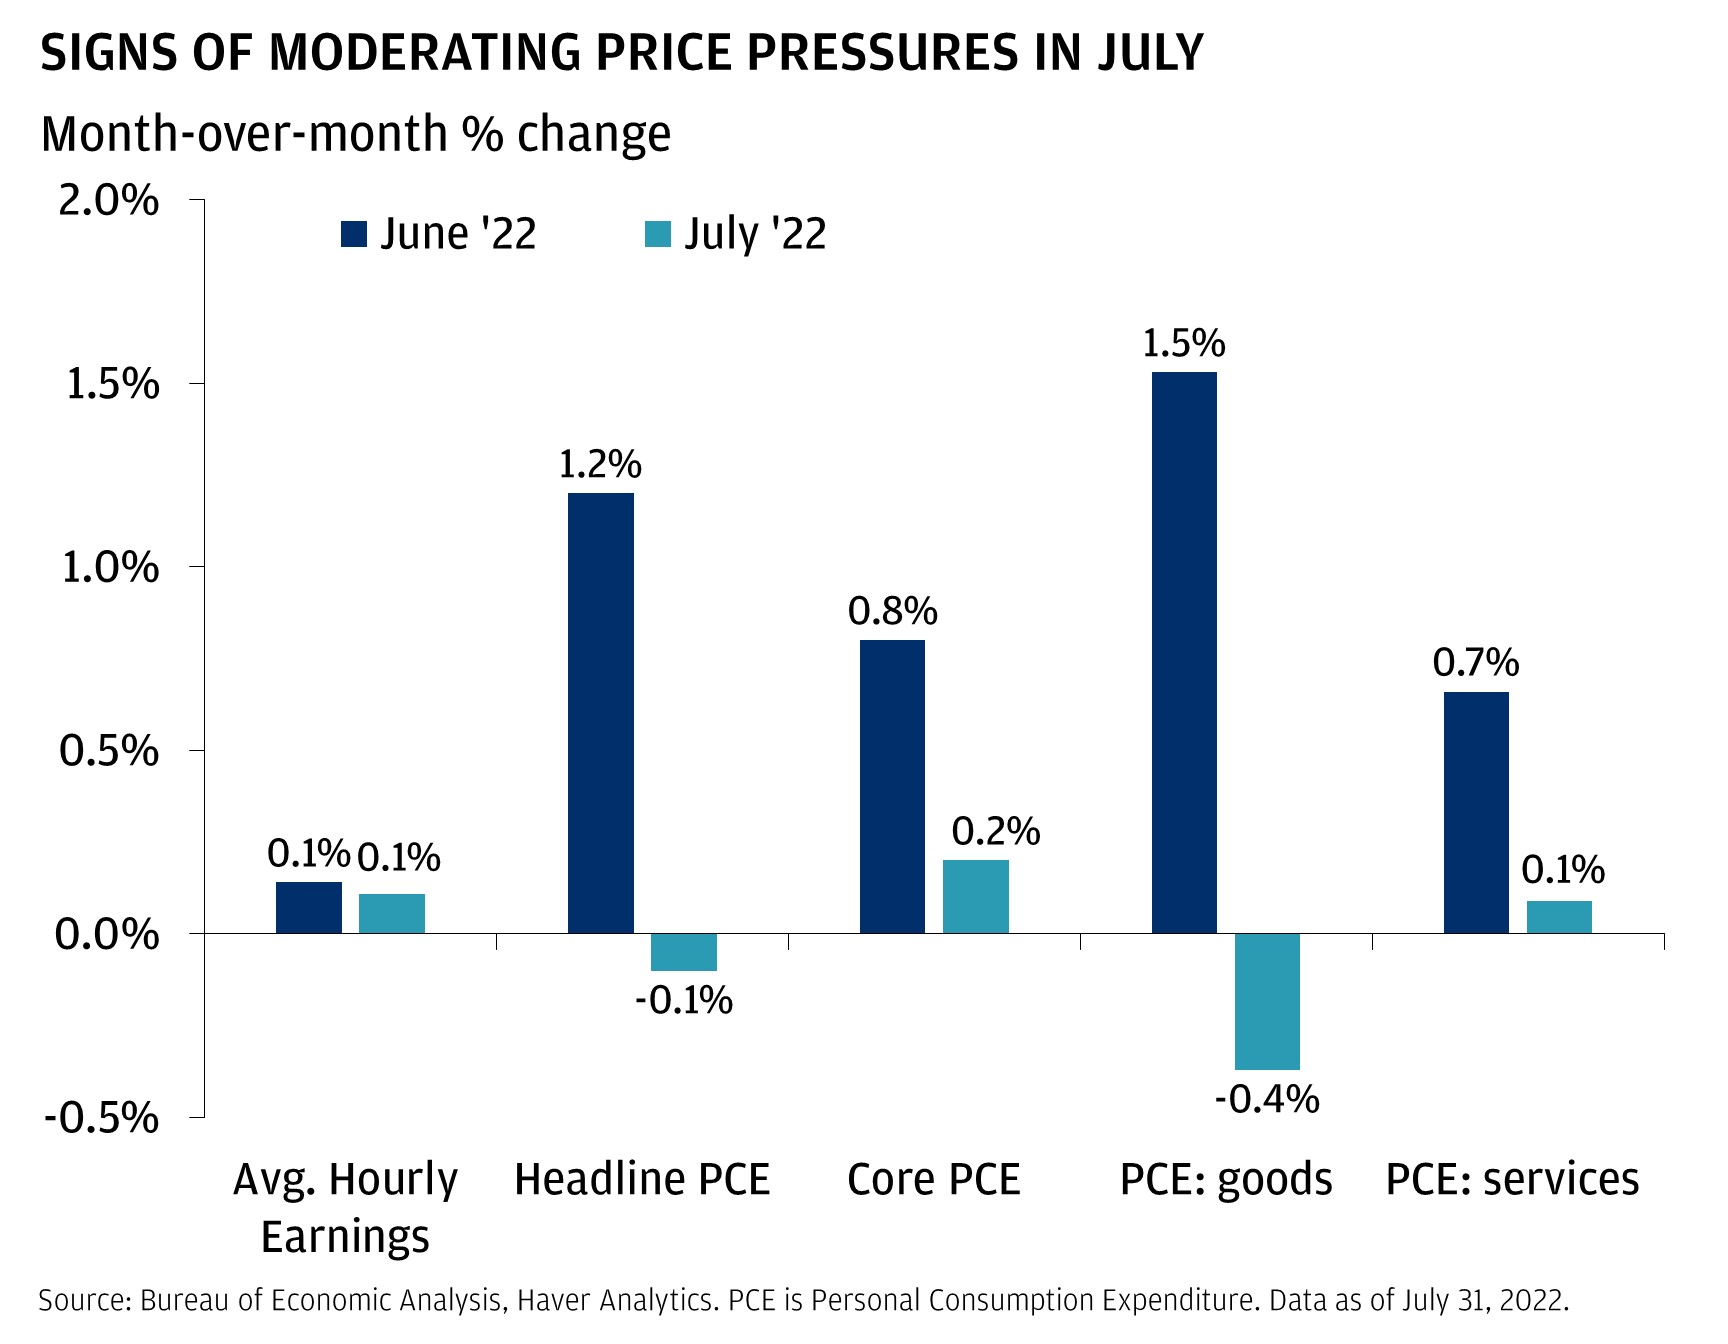 This chart shows the month-over-month % change on inflation indicators for June and July 2022.